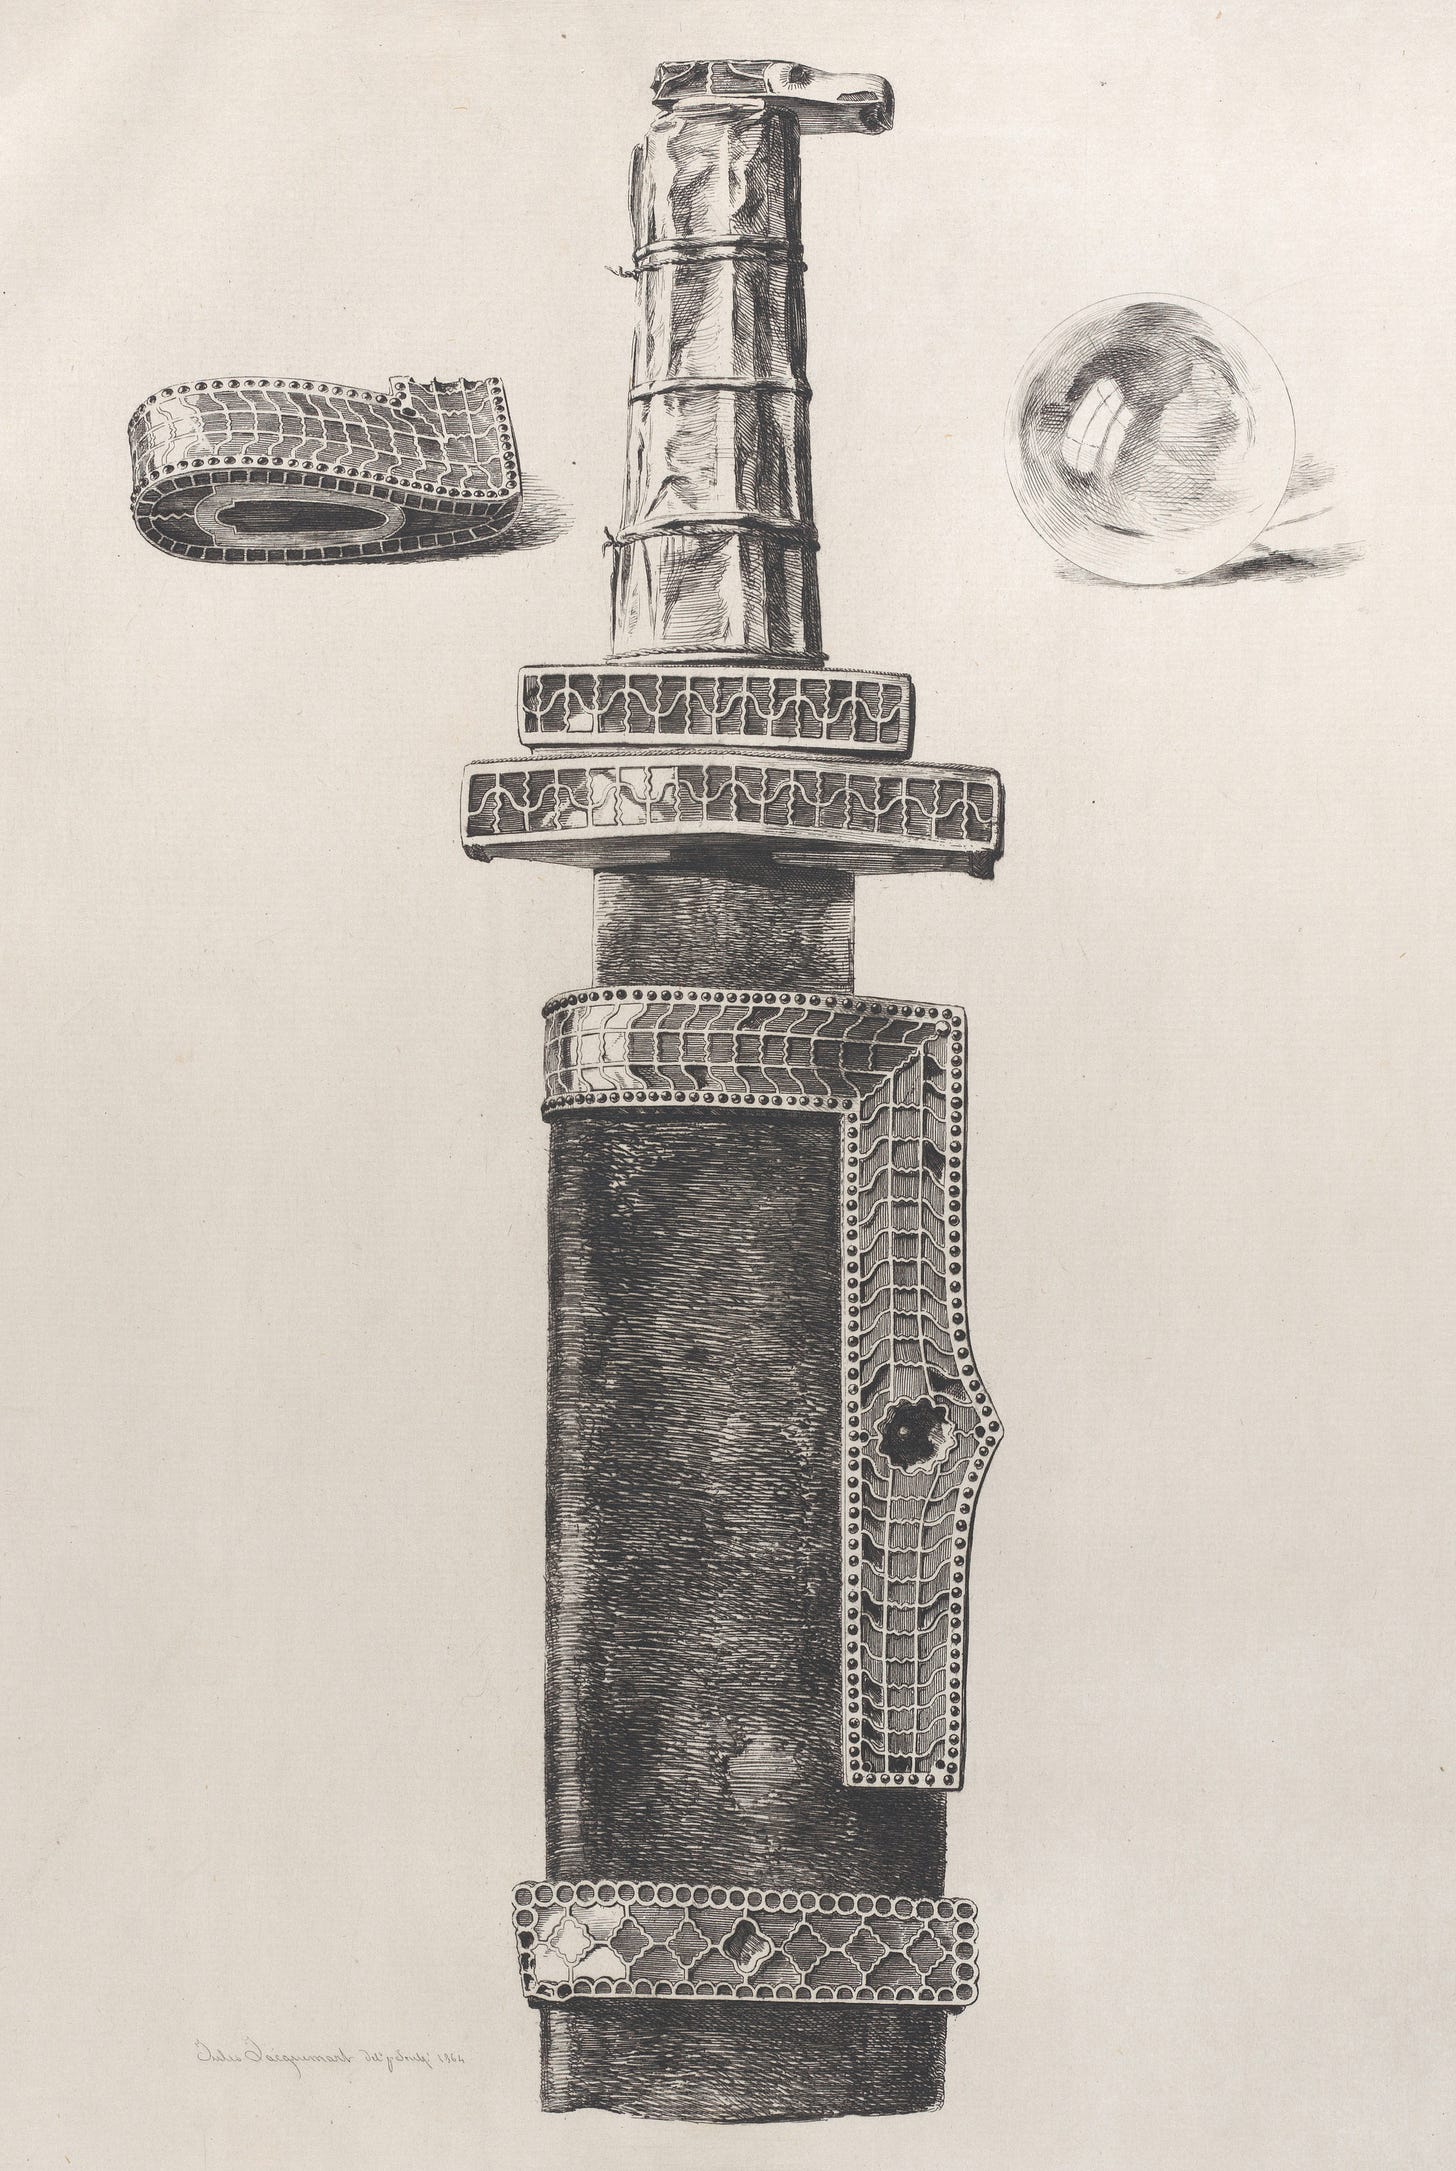 Black and white illustration of an ornate sword hilt and a crystal globe